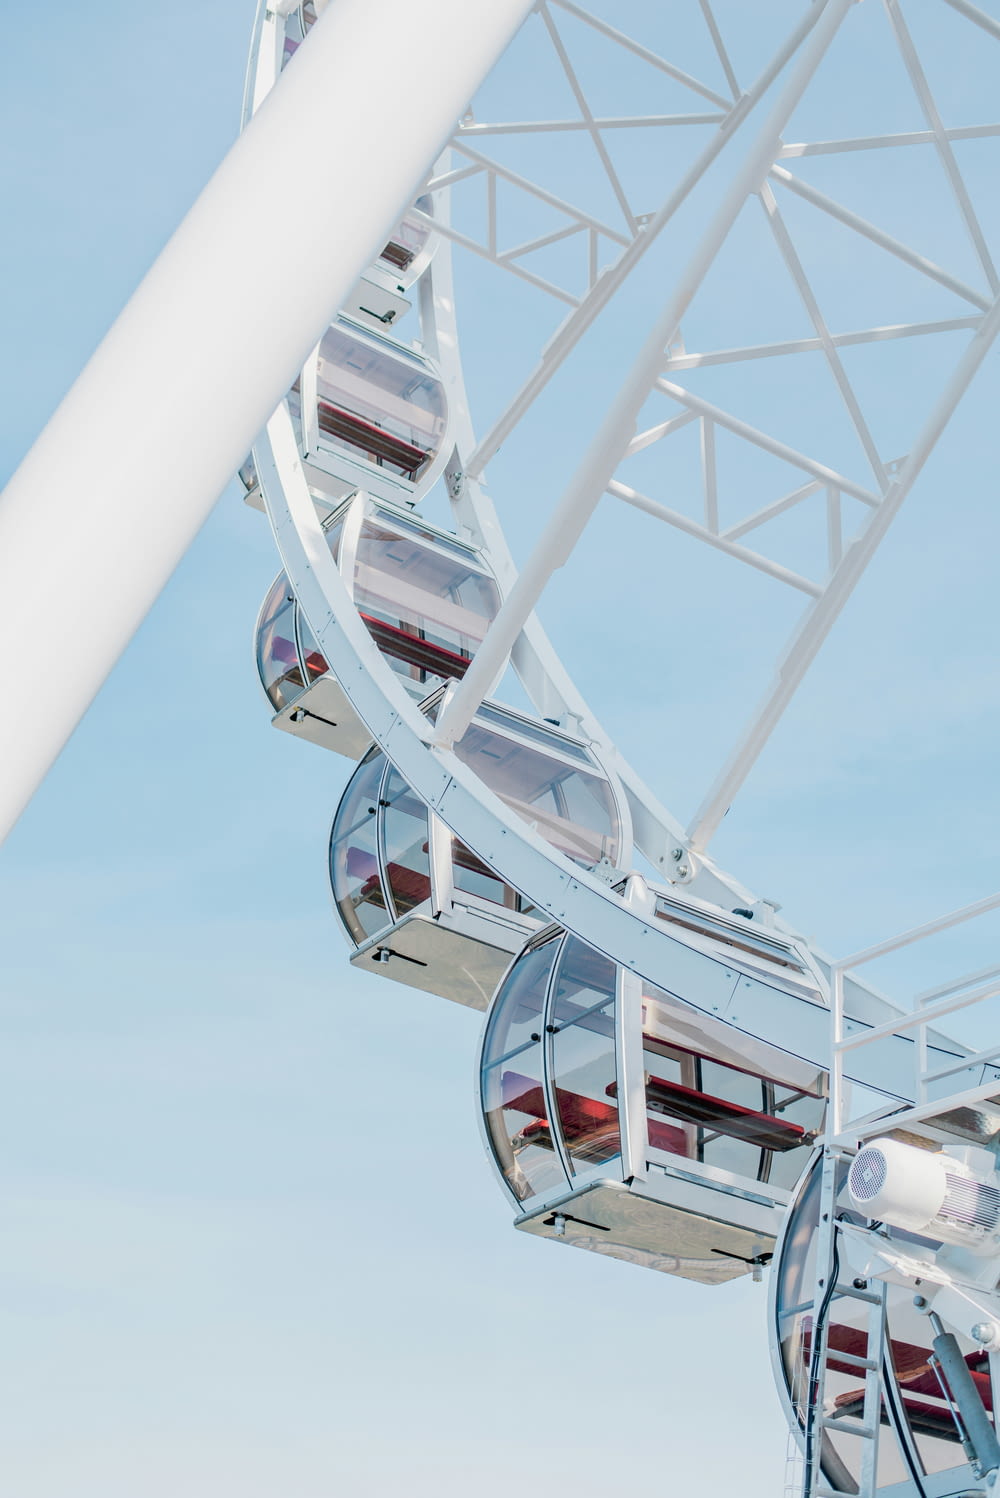 a ferris wheel with a sky background